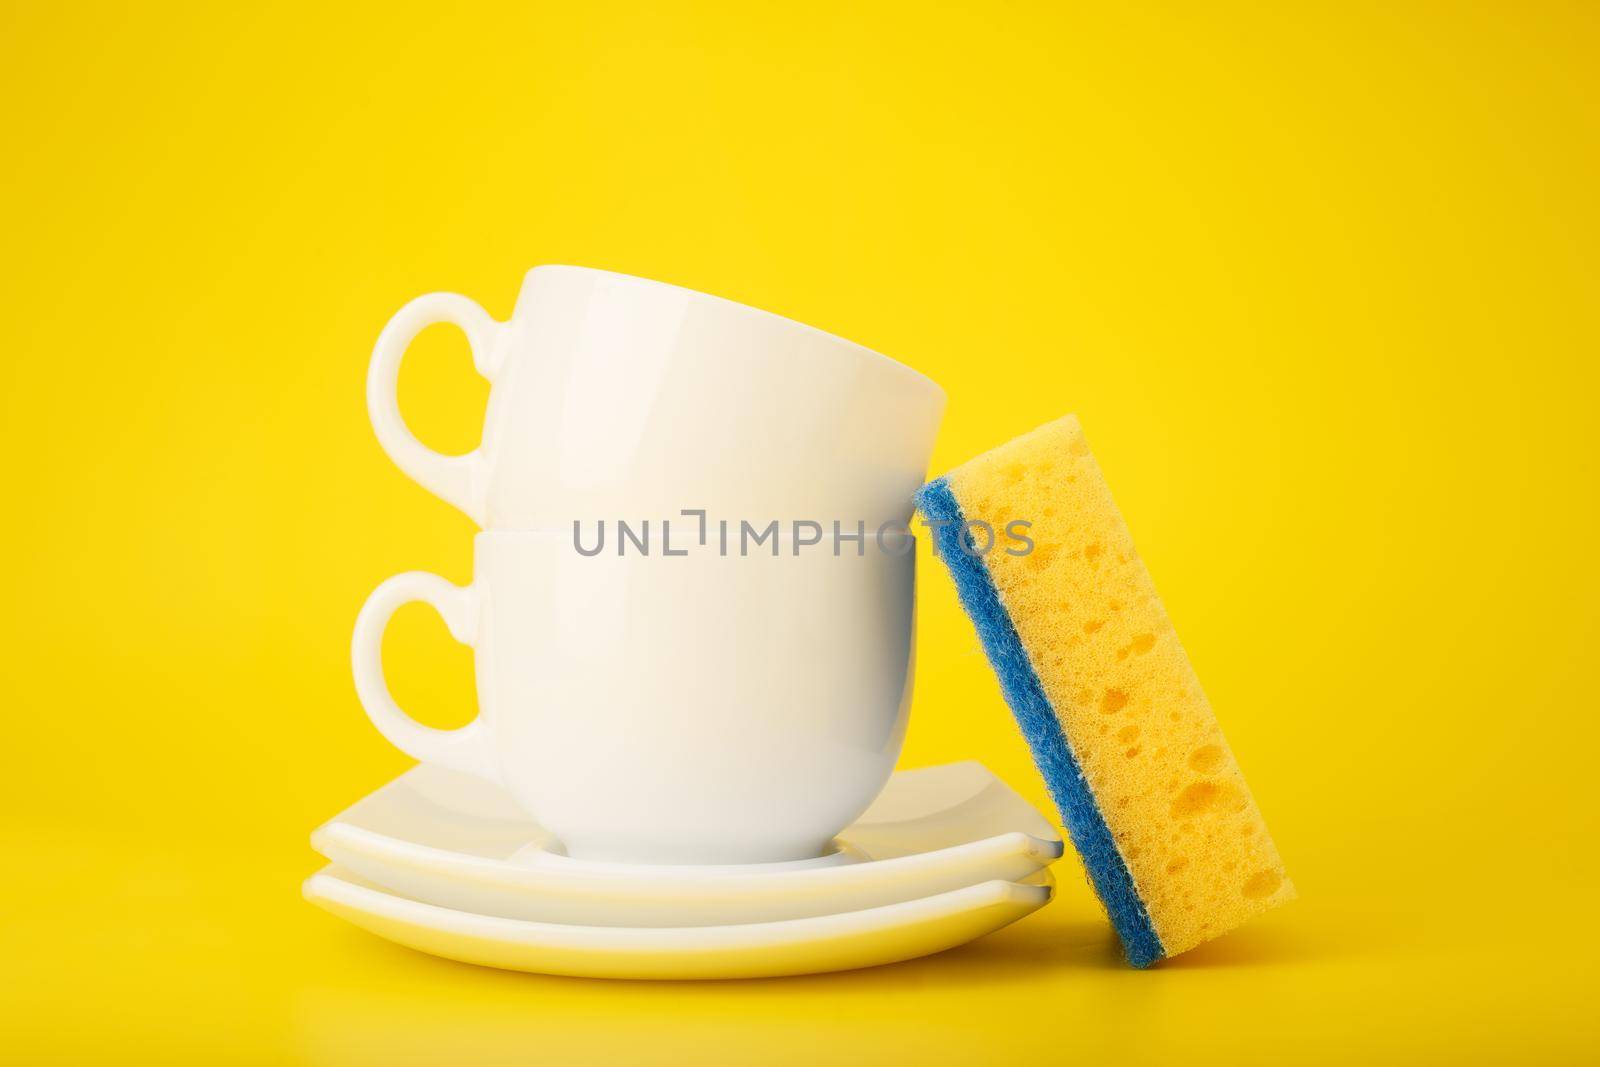 Dishwashing minimal concept. Plates, cups and cleaning sponge against bright yellow background by Senorina_Irina